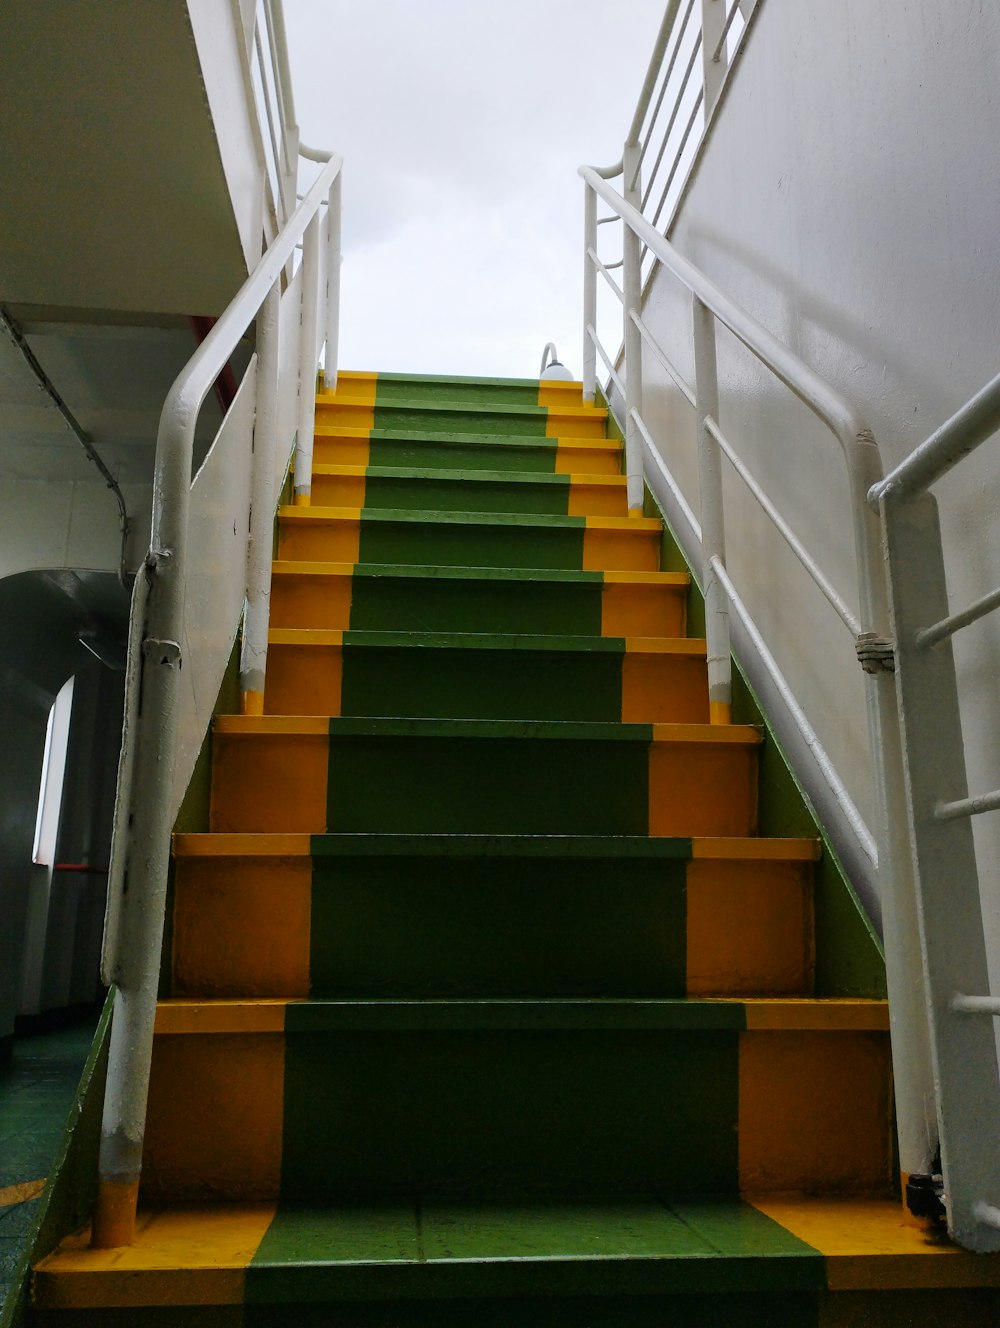 a set of stairs with yellow and green steps